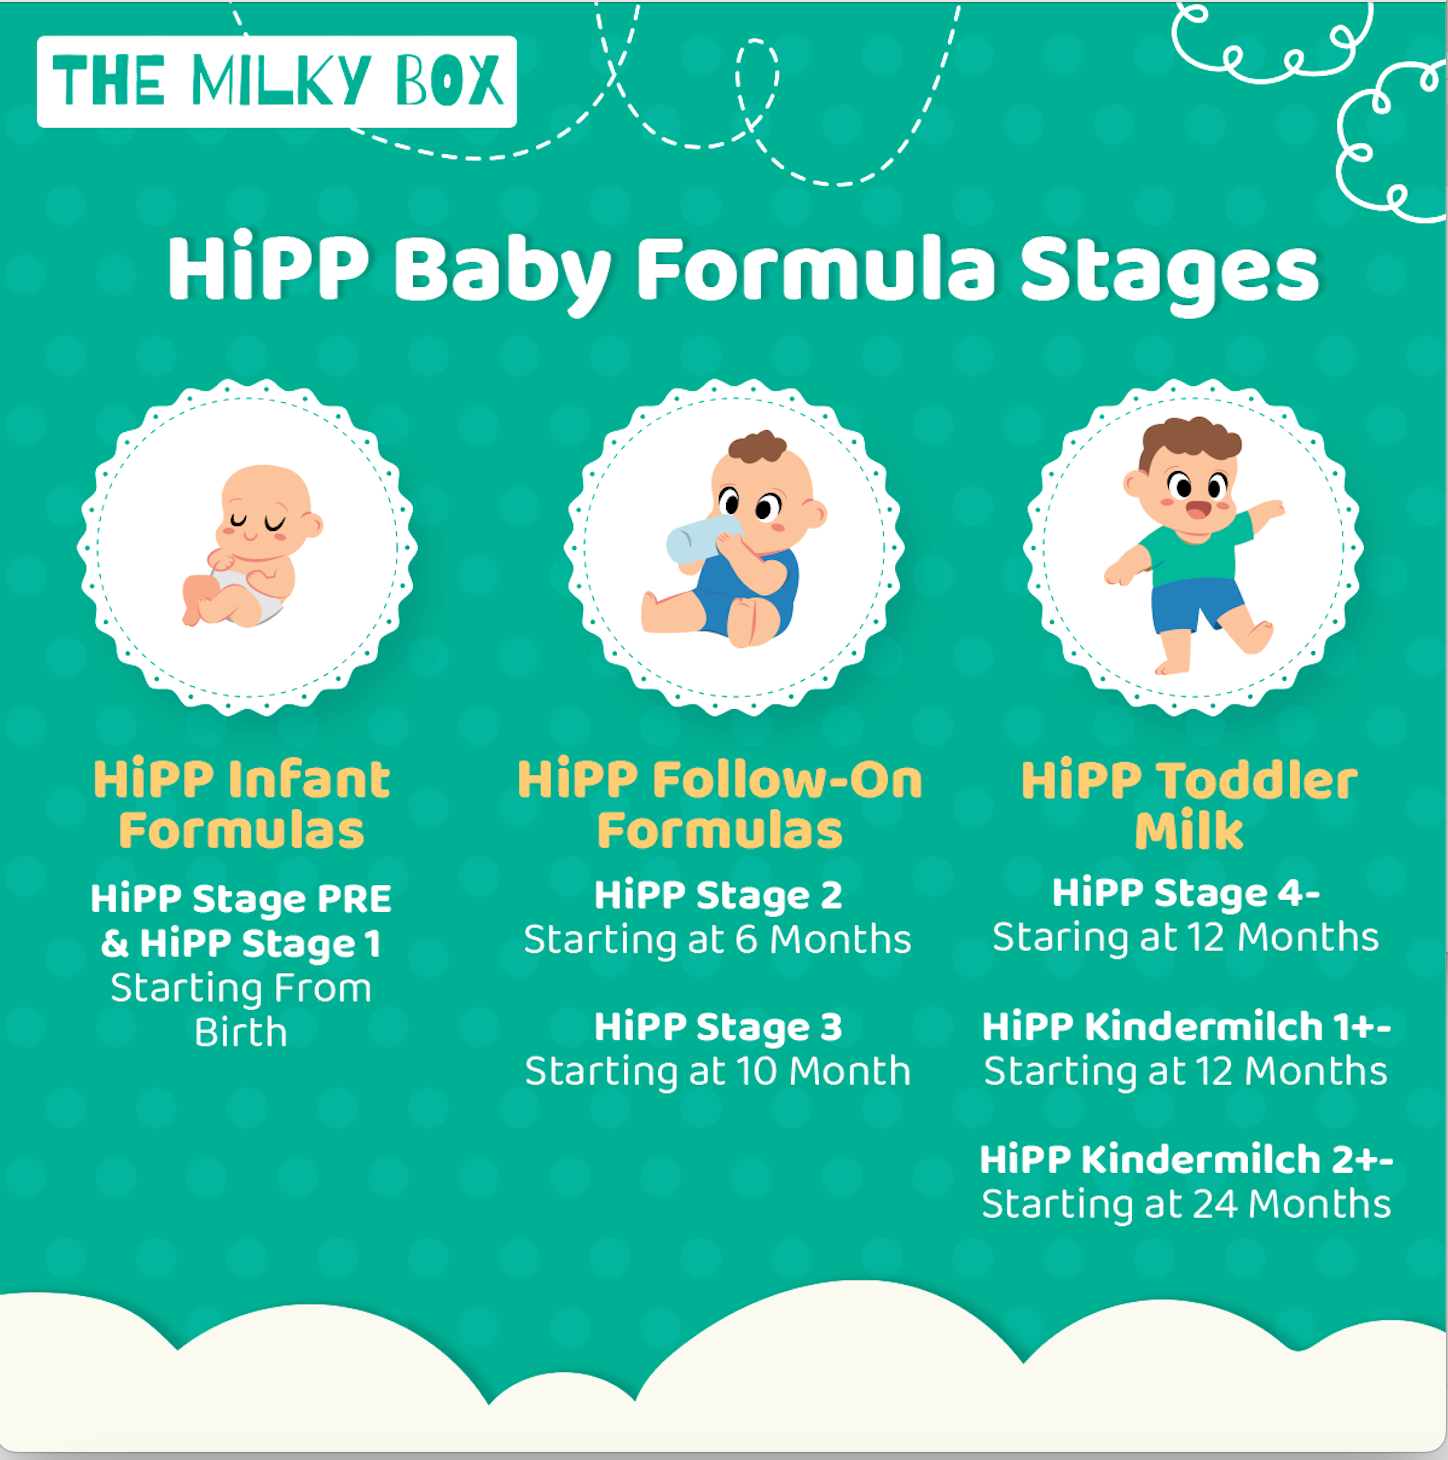 Hipp Baby Formula stages